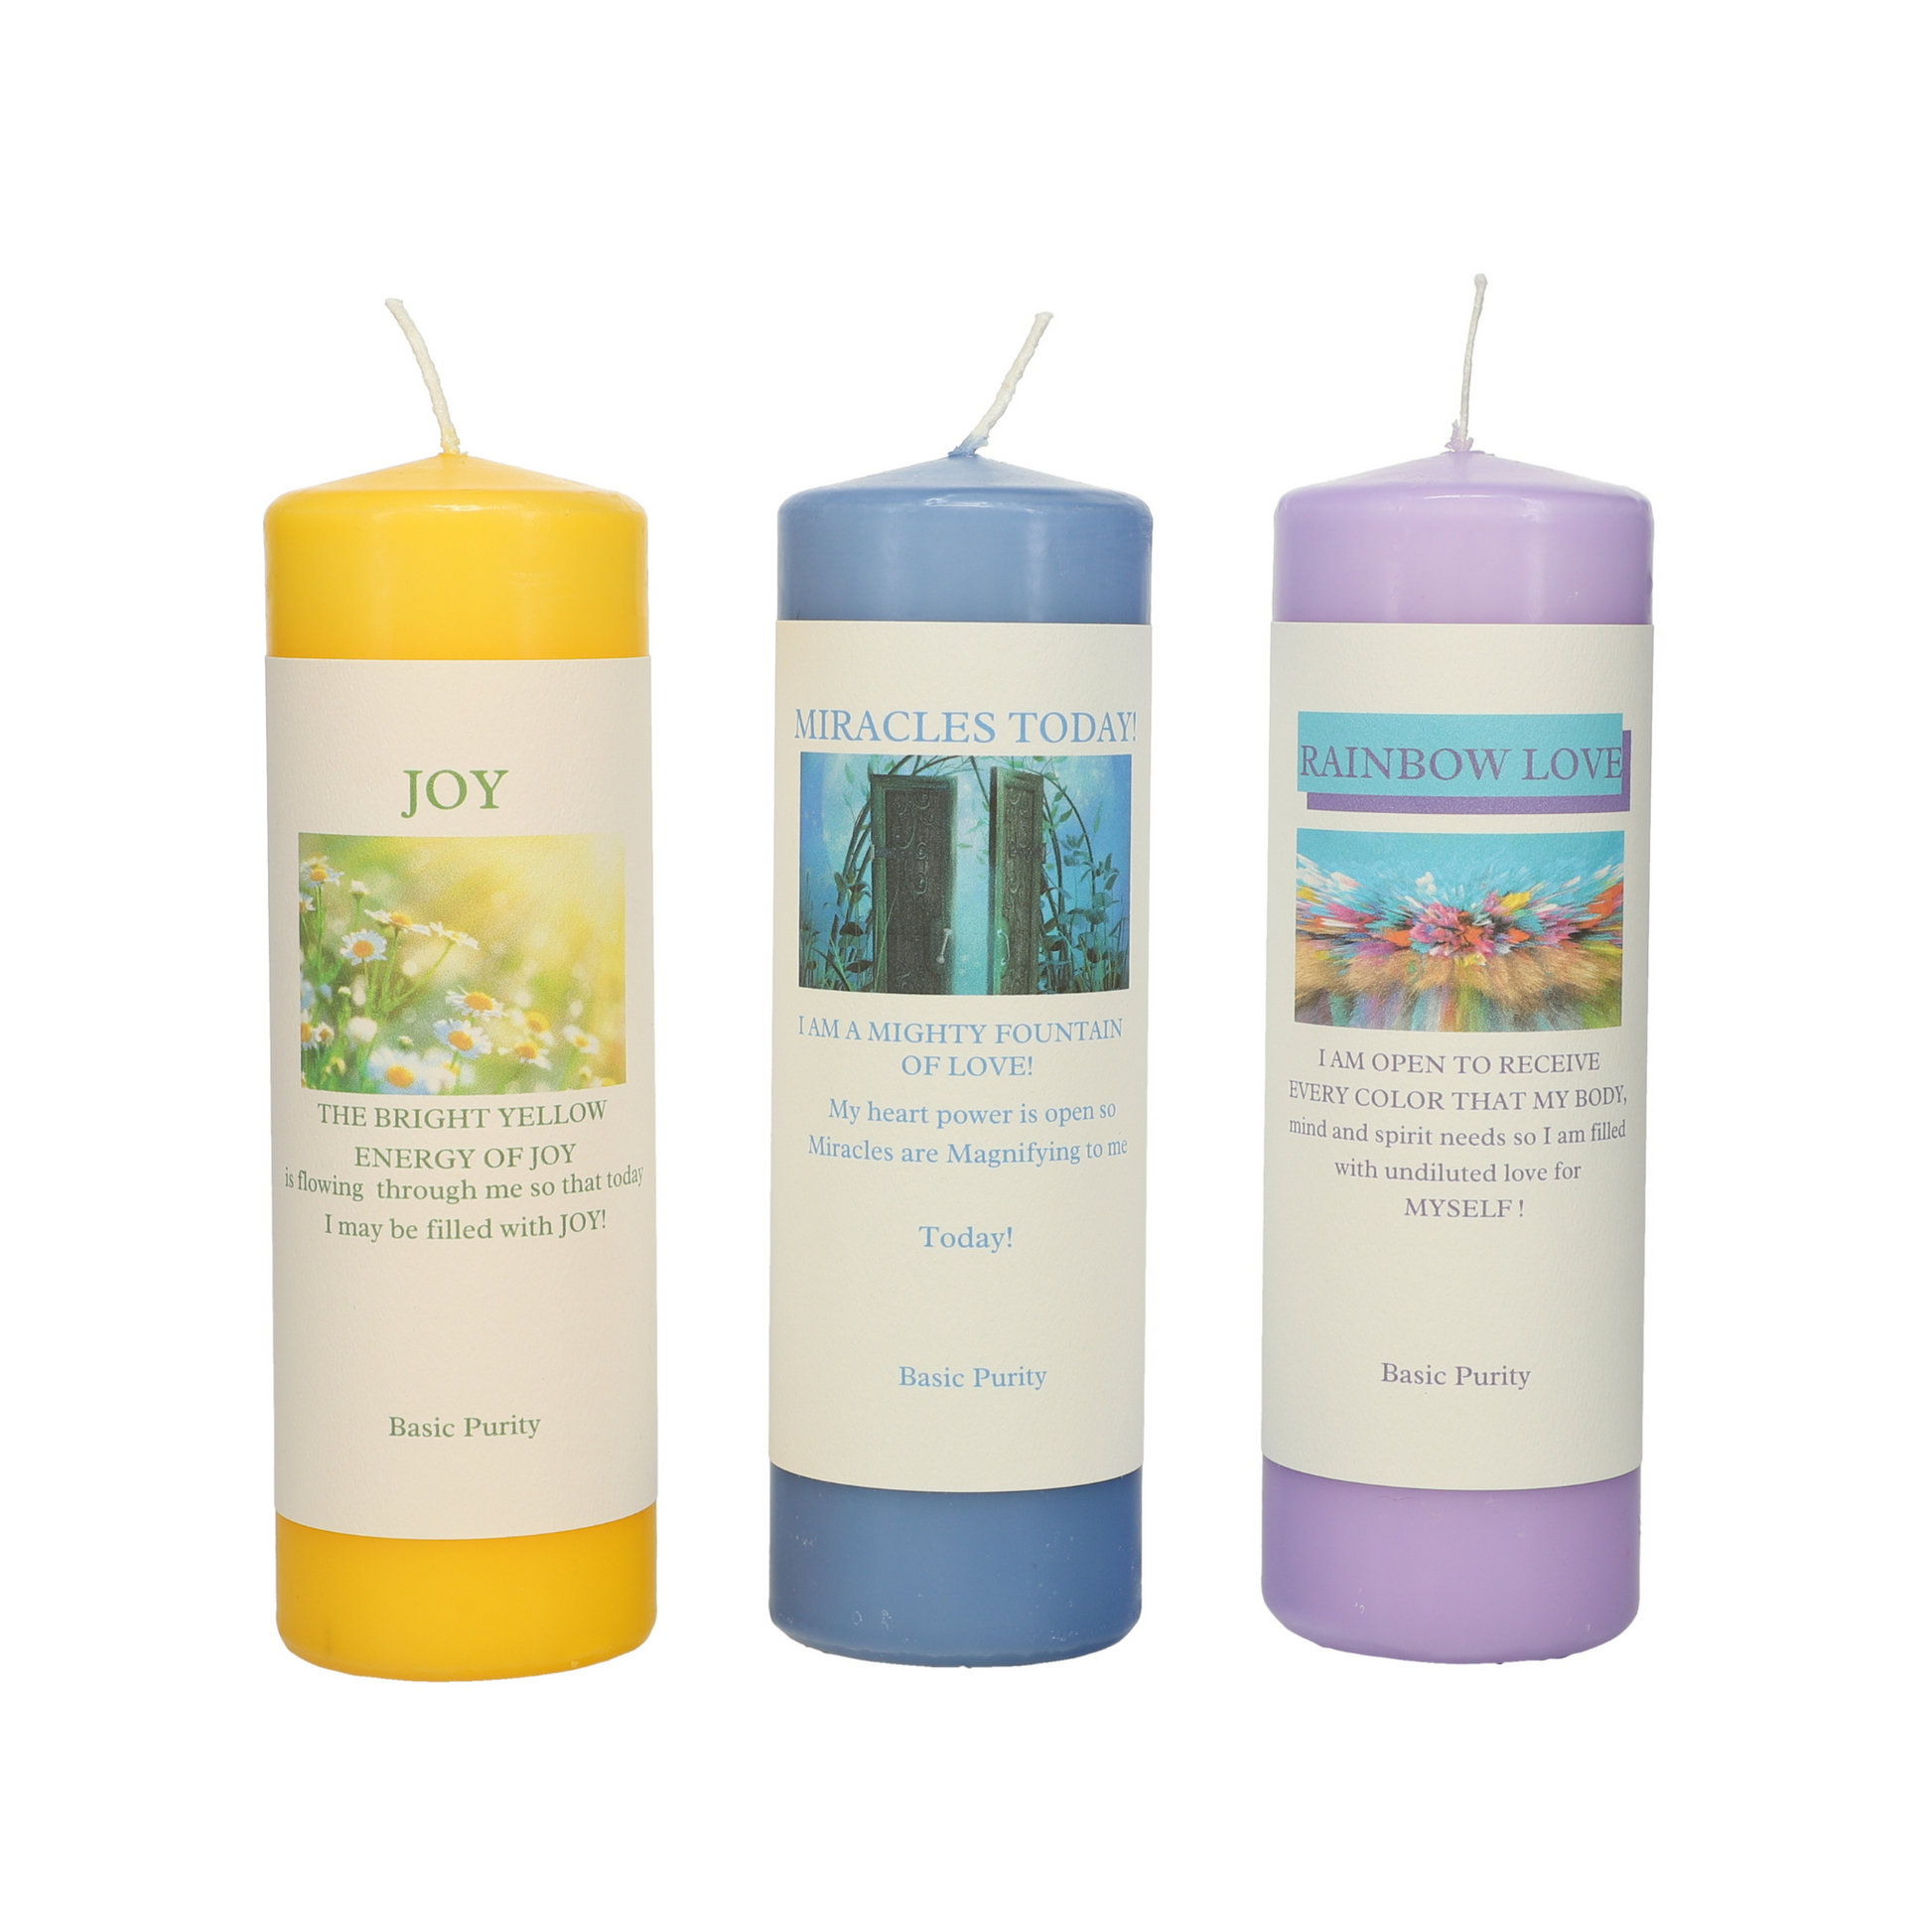 Joy, miracle today, and rainbow love candle set by Mary Armendarez